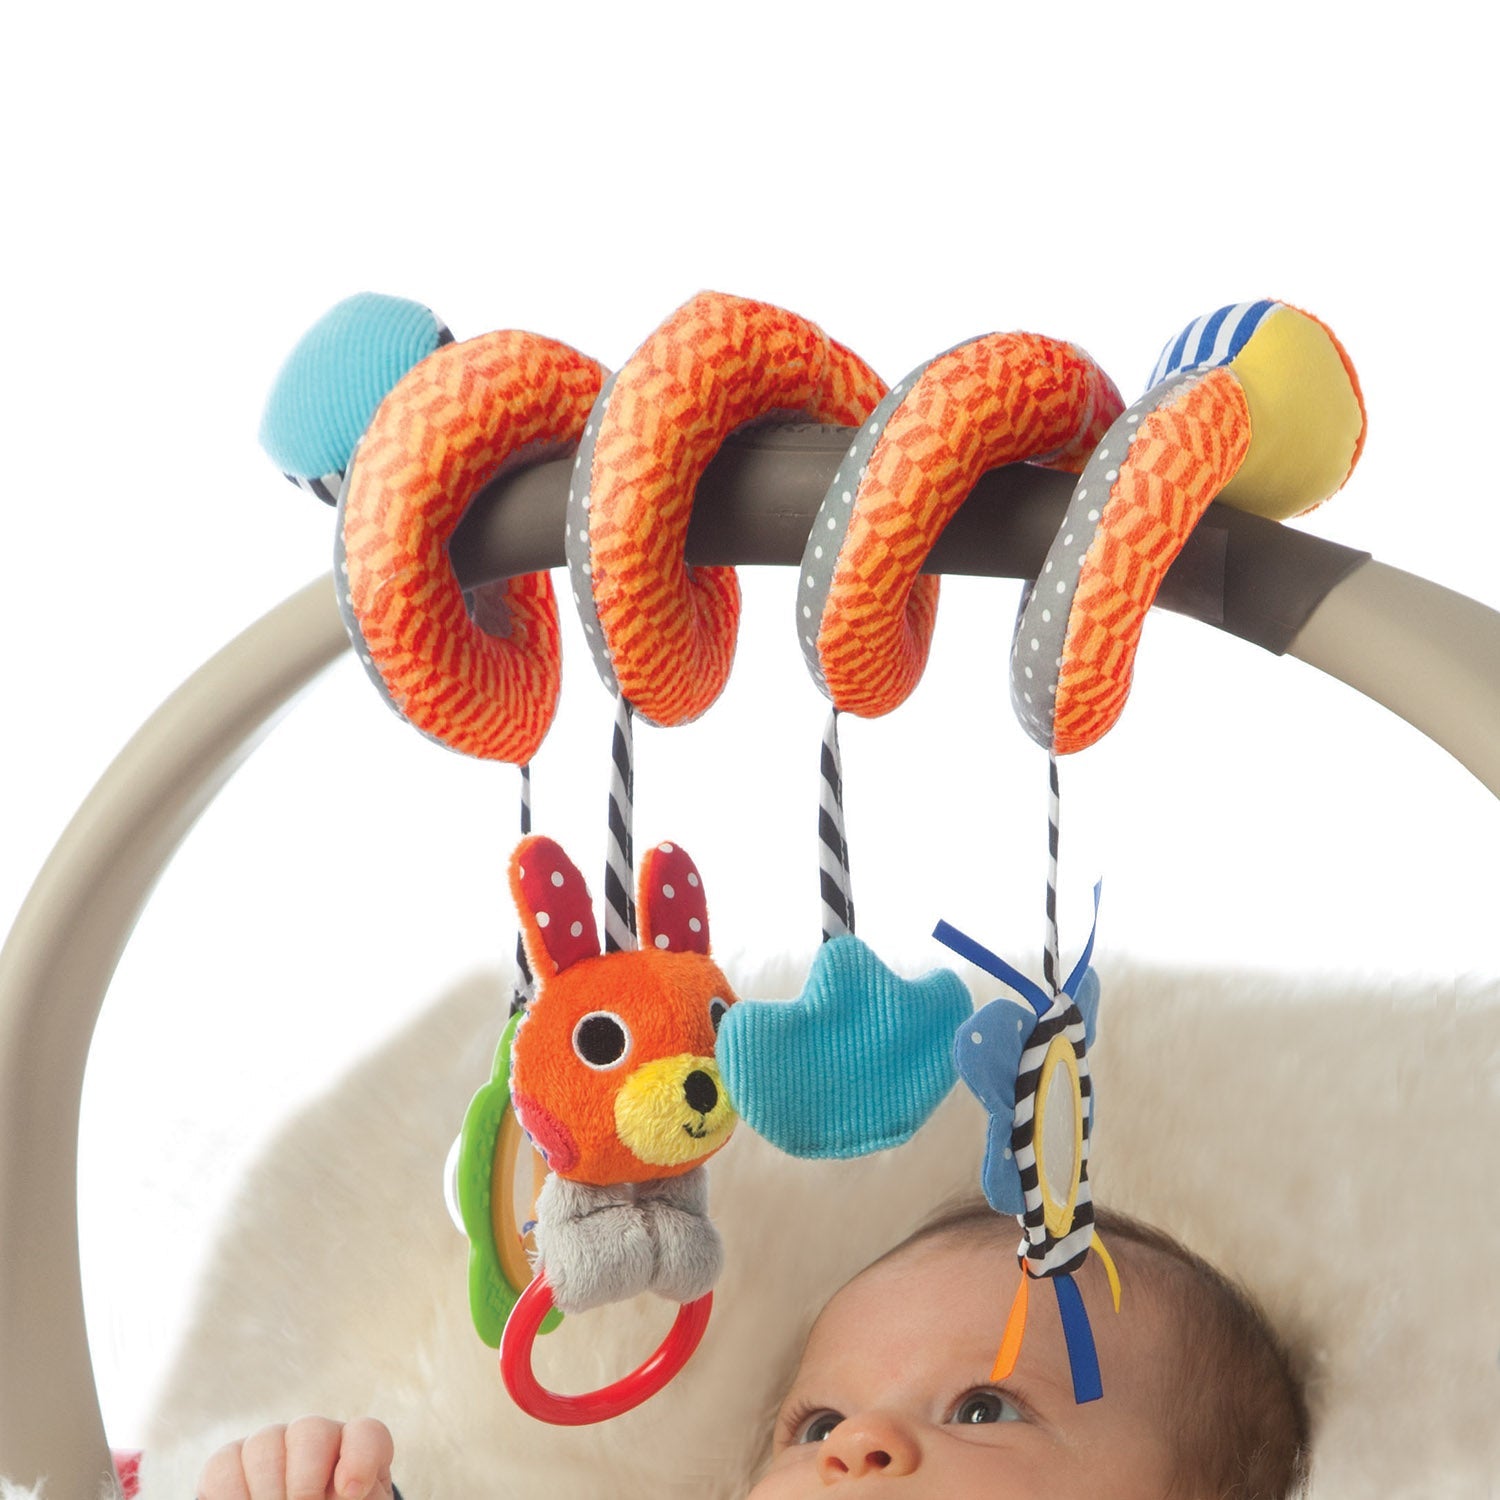 Manhattan Toy Take Along Play Activity Spiral Teethers